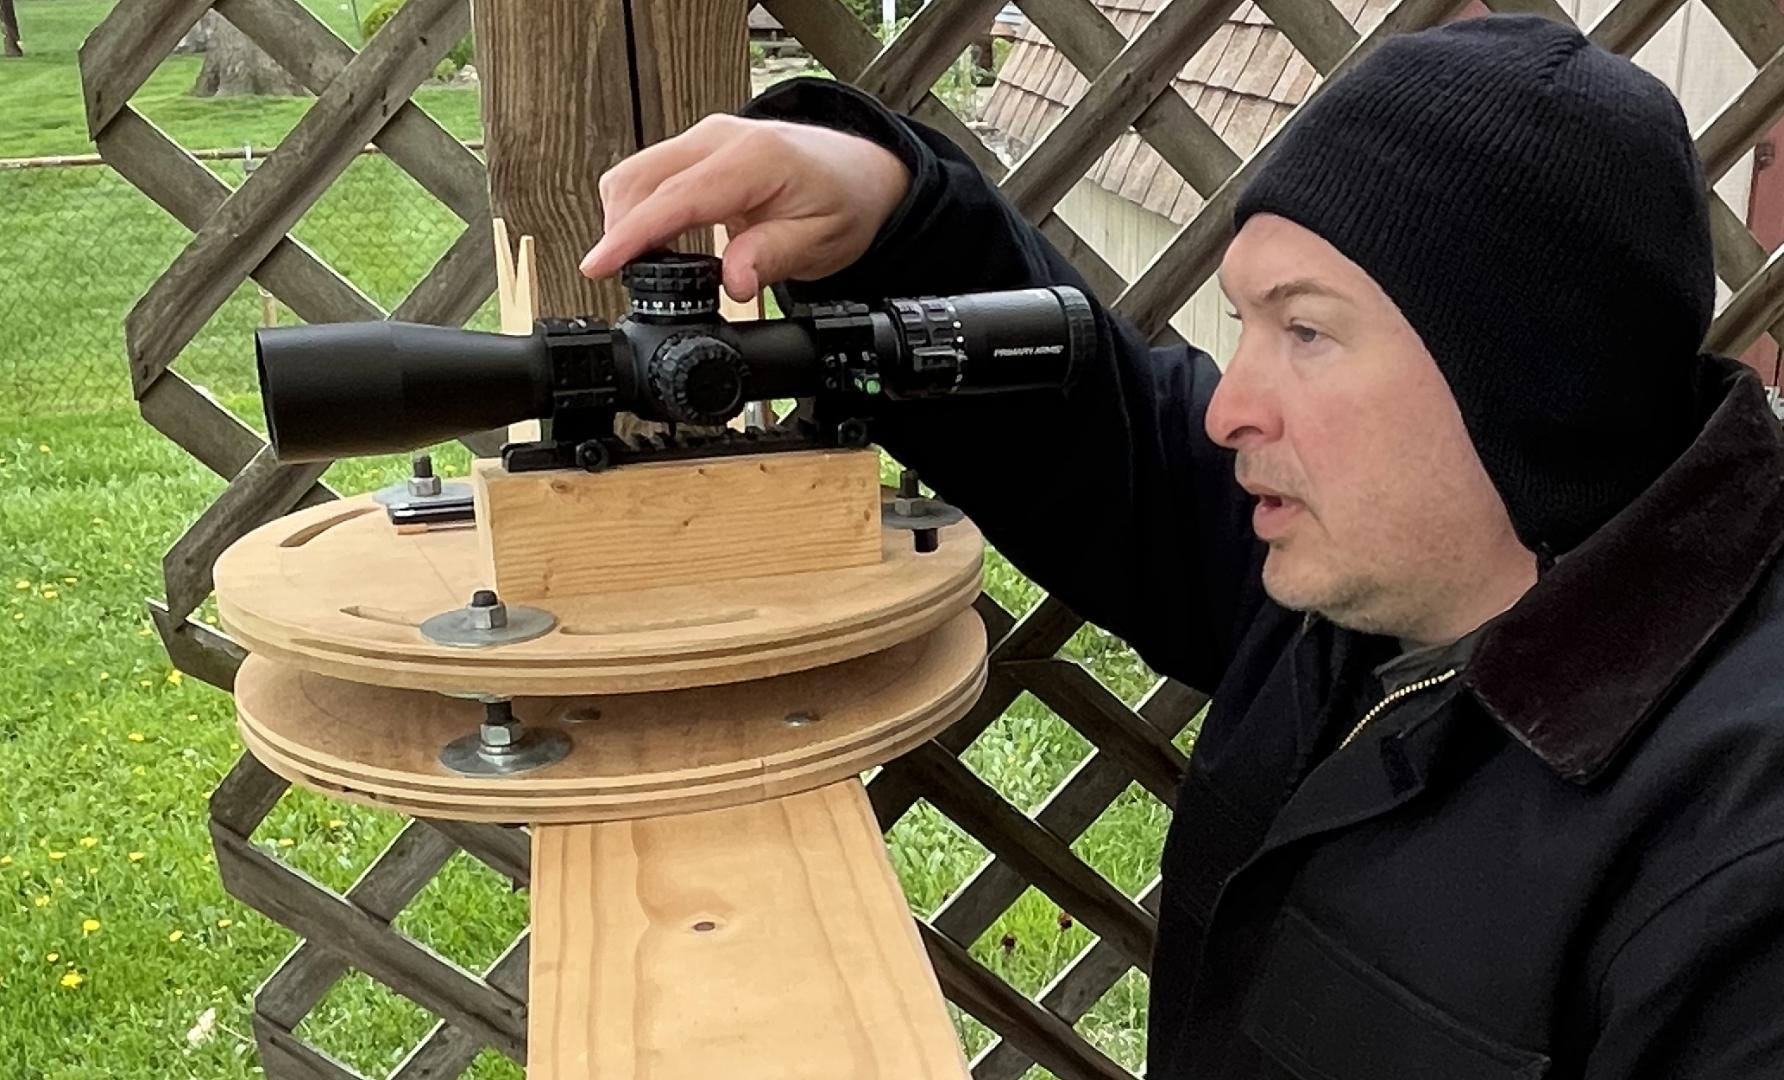 Mechanical testing on the Primary Arms Optics GLx 3-18x44